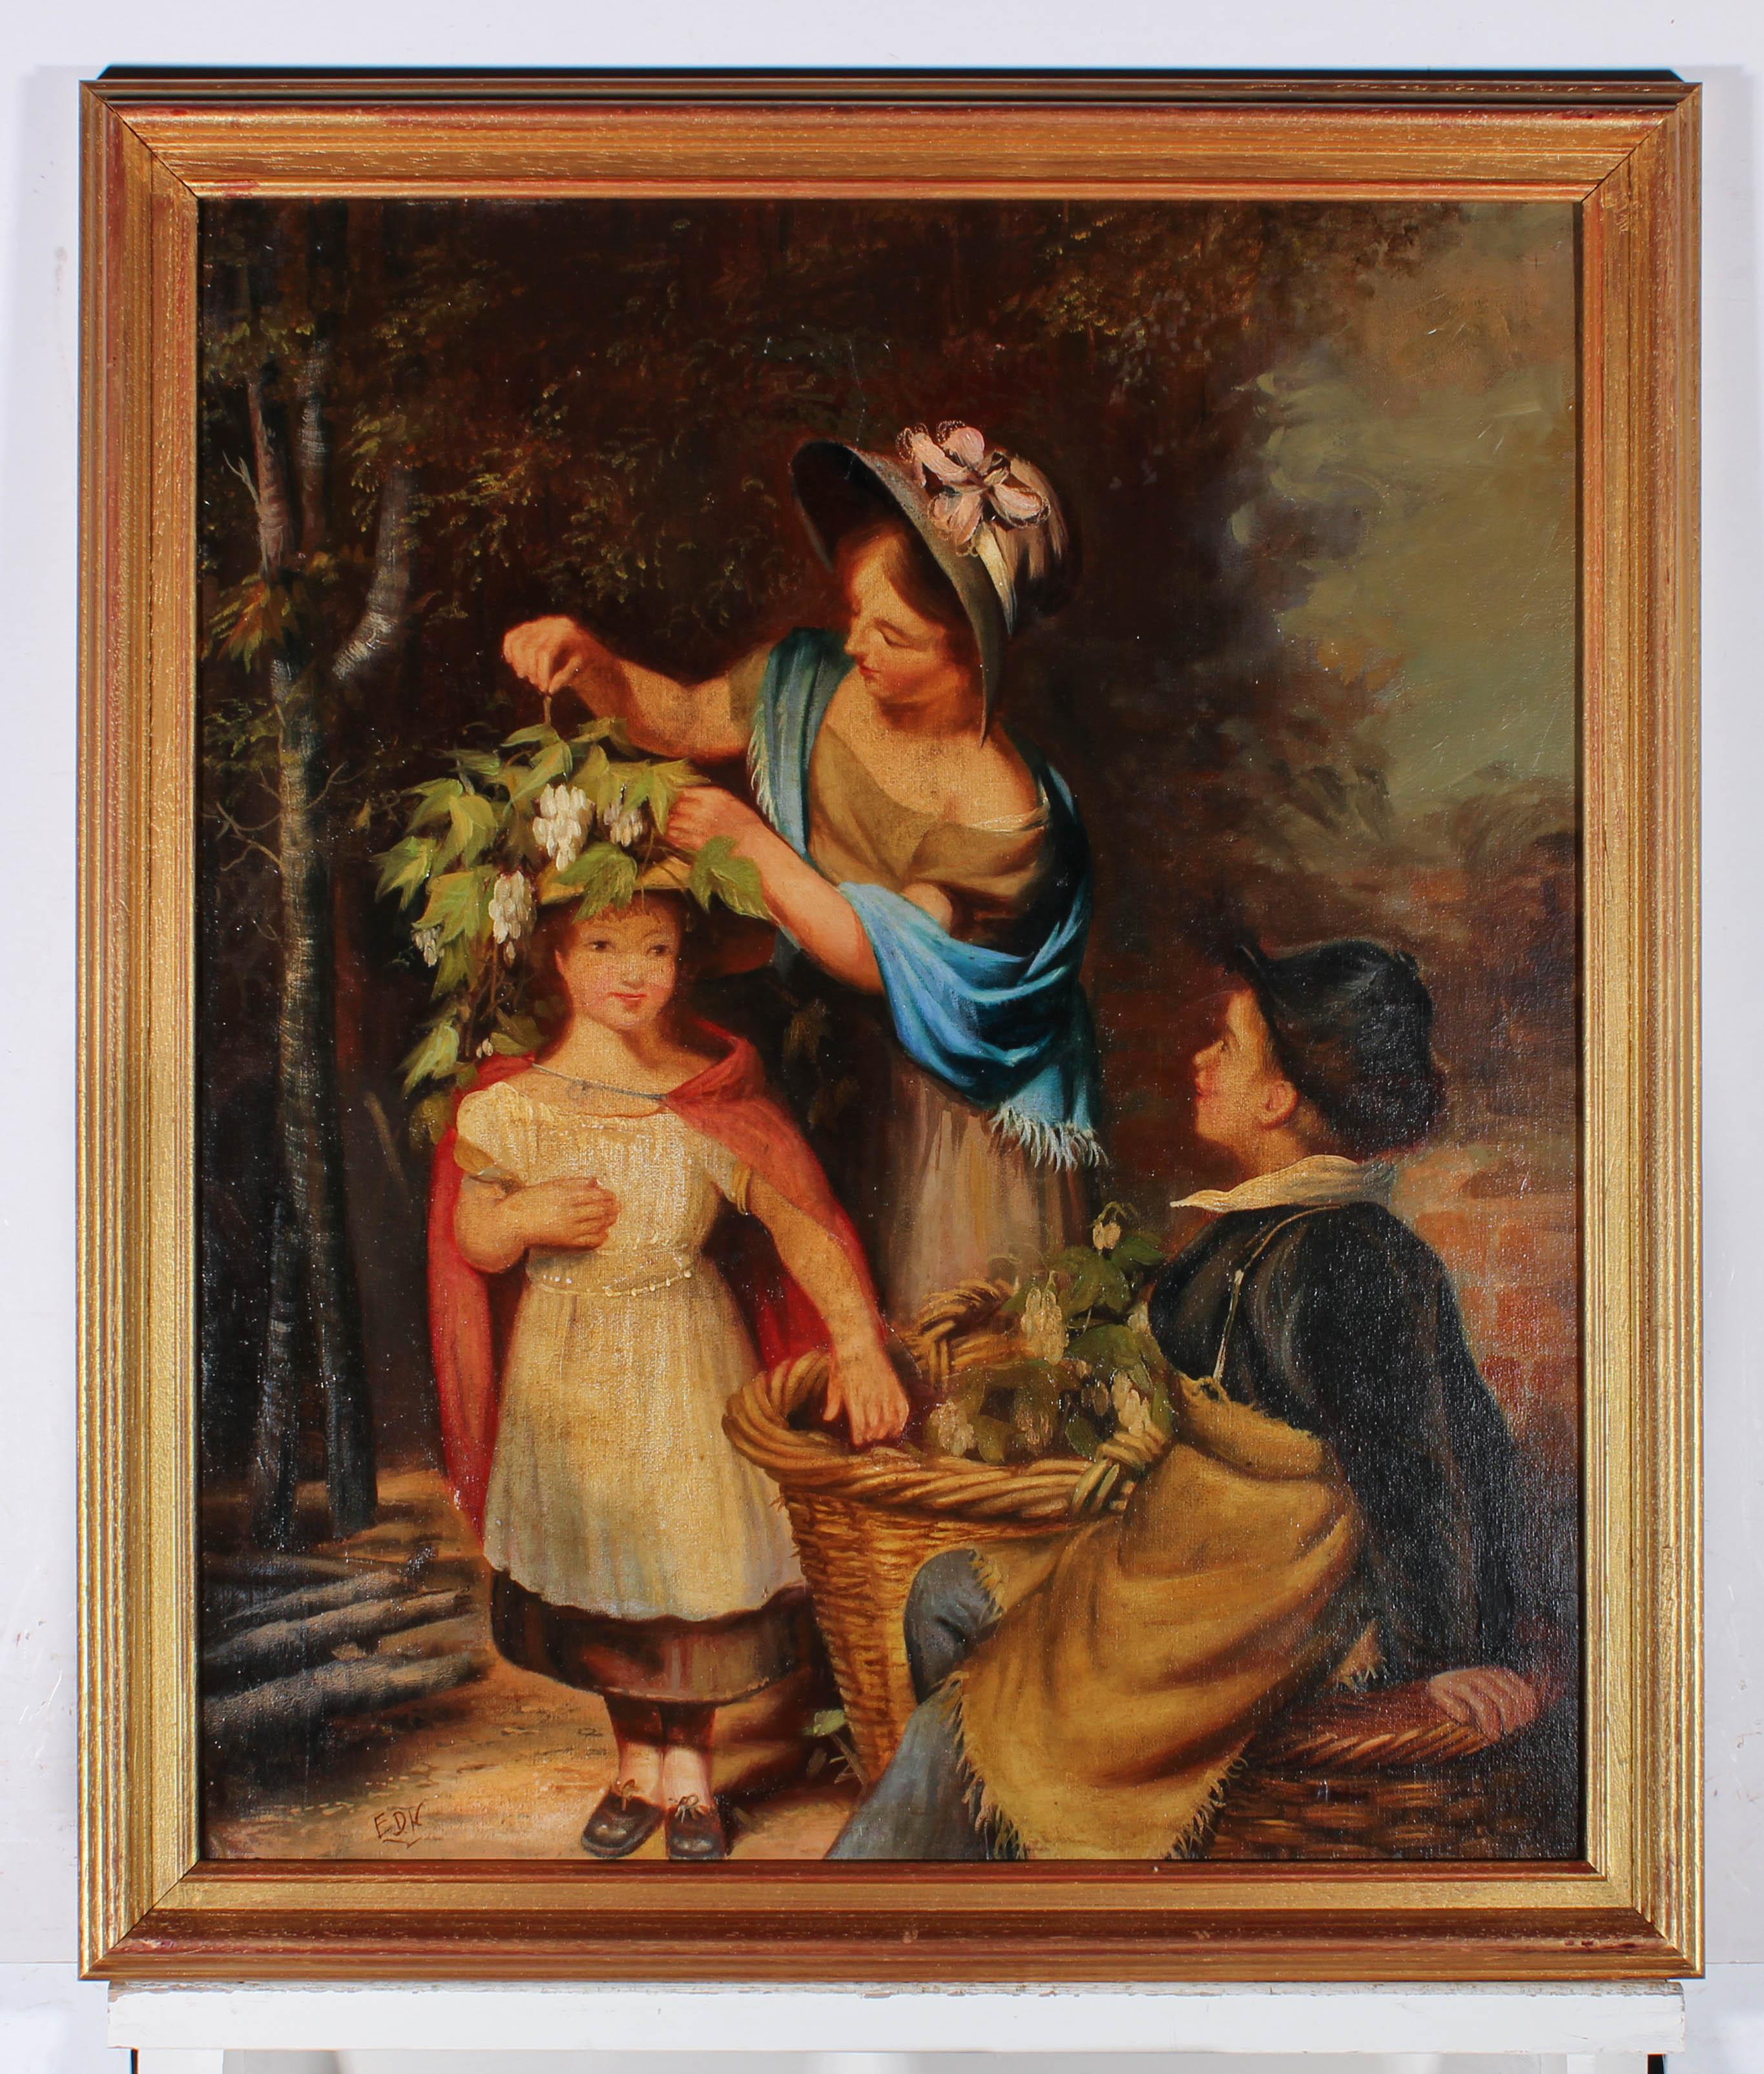 A heartwarming late 19th Century scene in oil, showing a mother decorating her daughter's bonnet with leaves and flowers as her son watches with a smile. The scene has s simple domestic happiness, focusing on the small moments between family. The